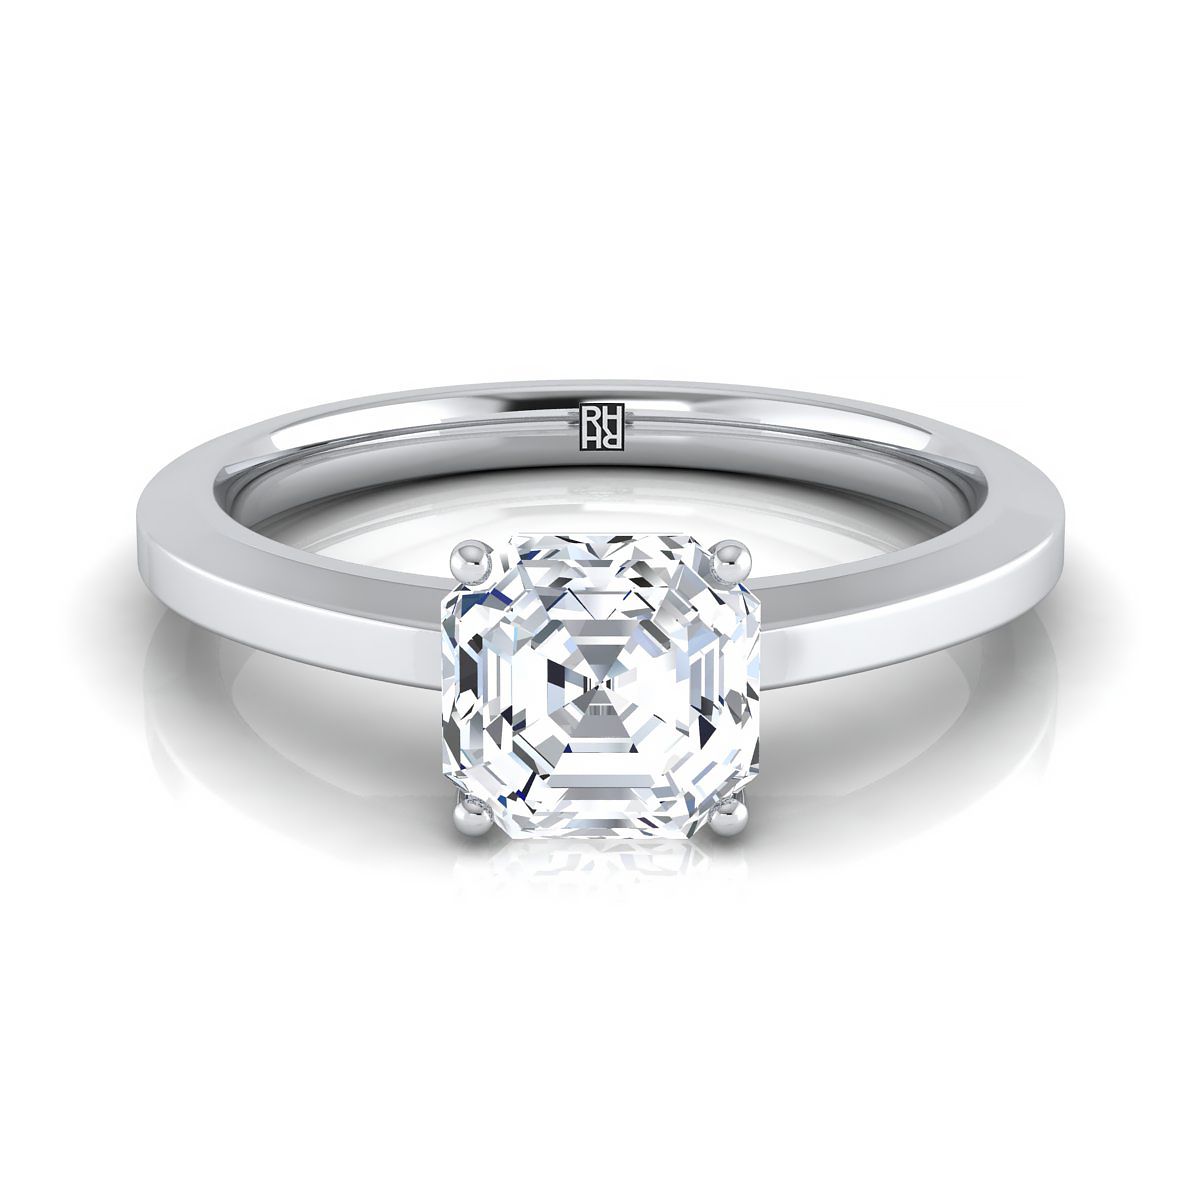 18K White Gold Asscher Cut  Beveled Edge Comfort Style Bright Finish Solitaire Engagement Ring